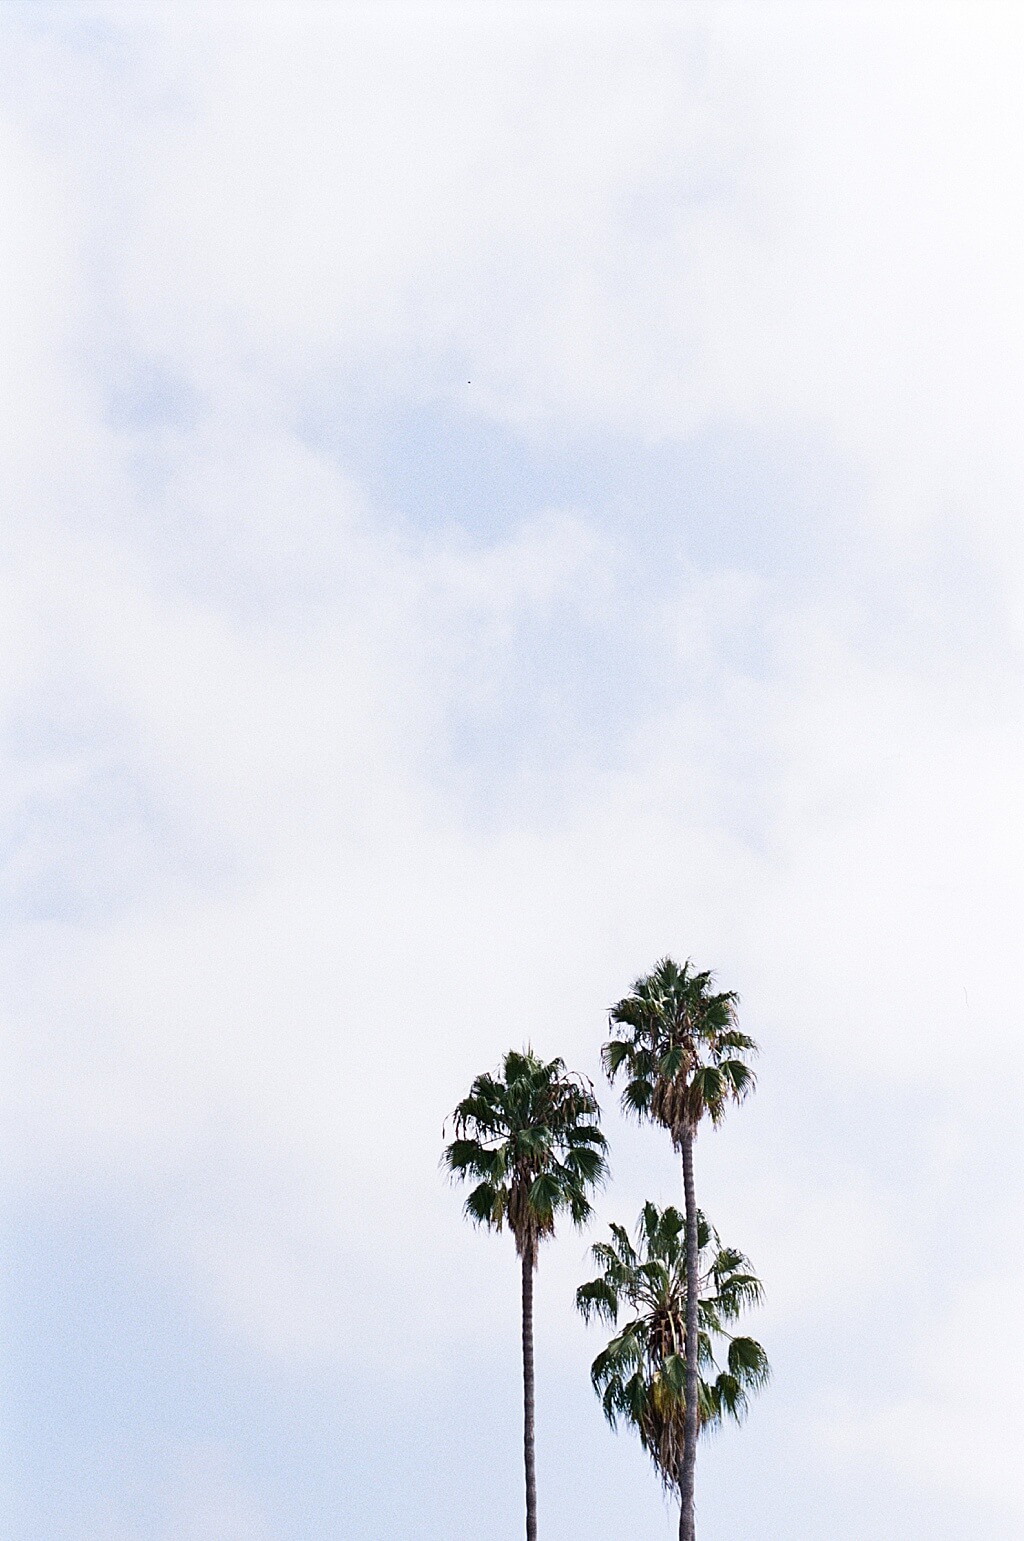 Three staggered palm trees rise against a cloudy blue sky at Balboa Park in San Diego